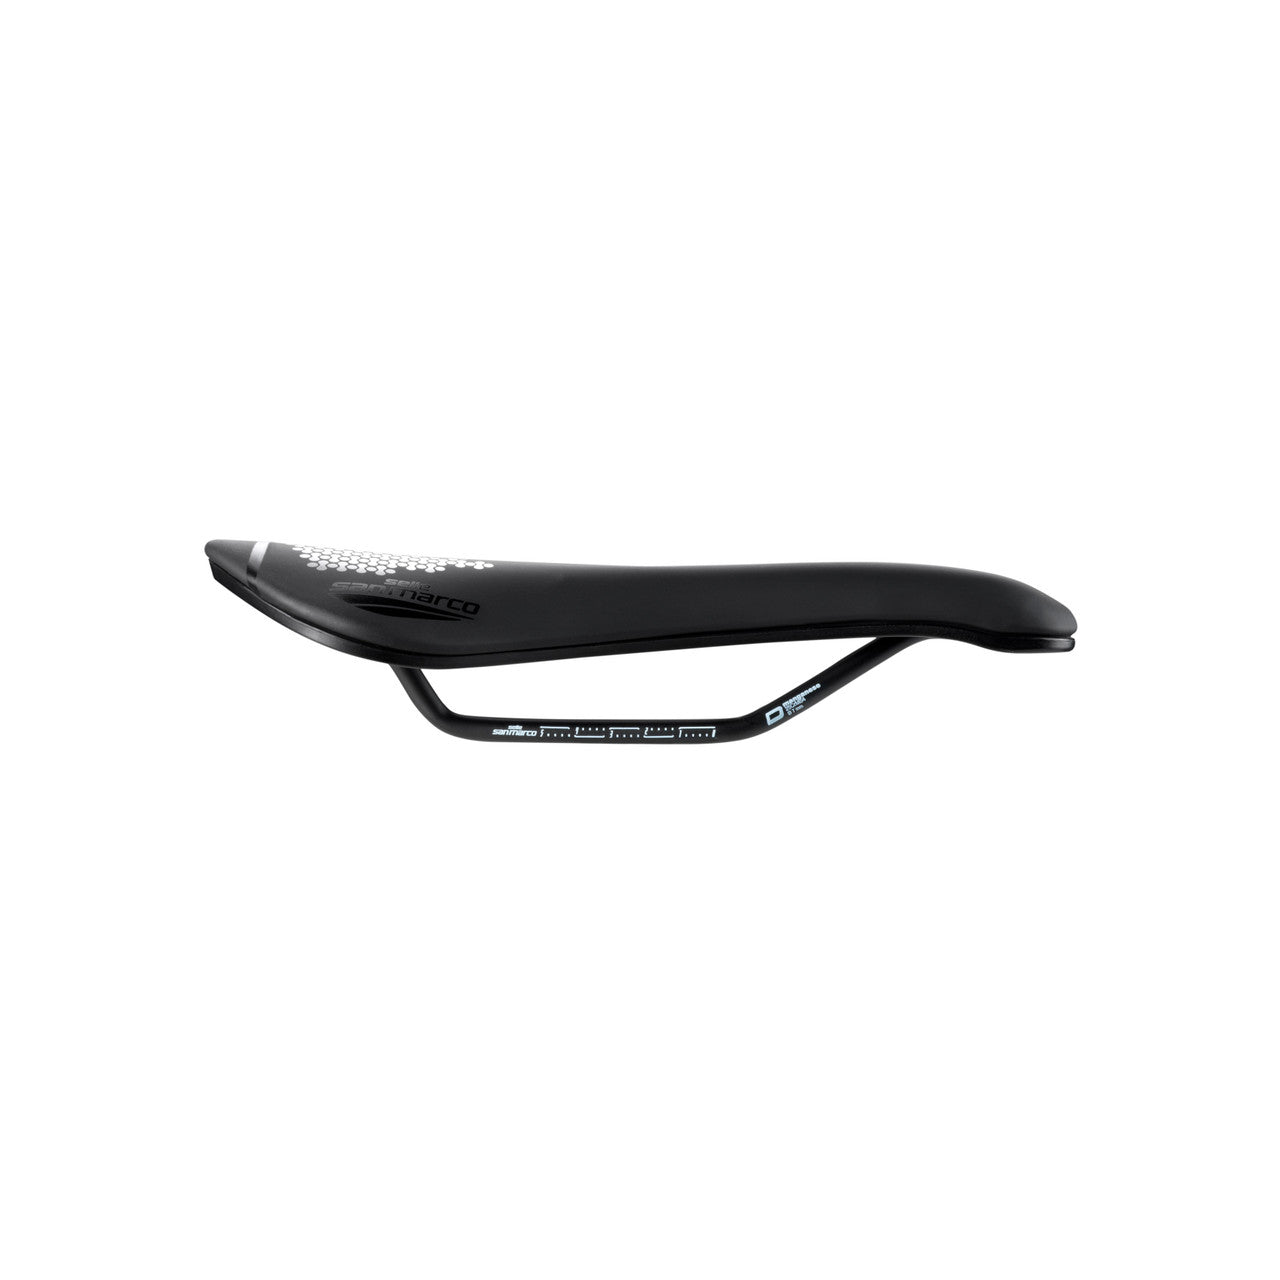 San Marco Aspide Short Open-Fit Dynamic Narrow S3 saddle